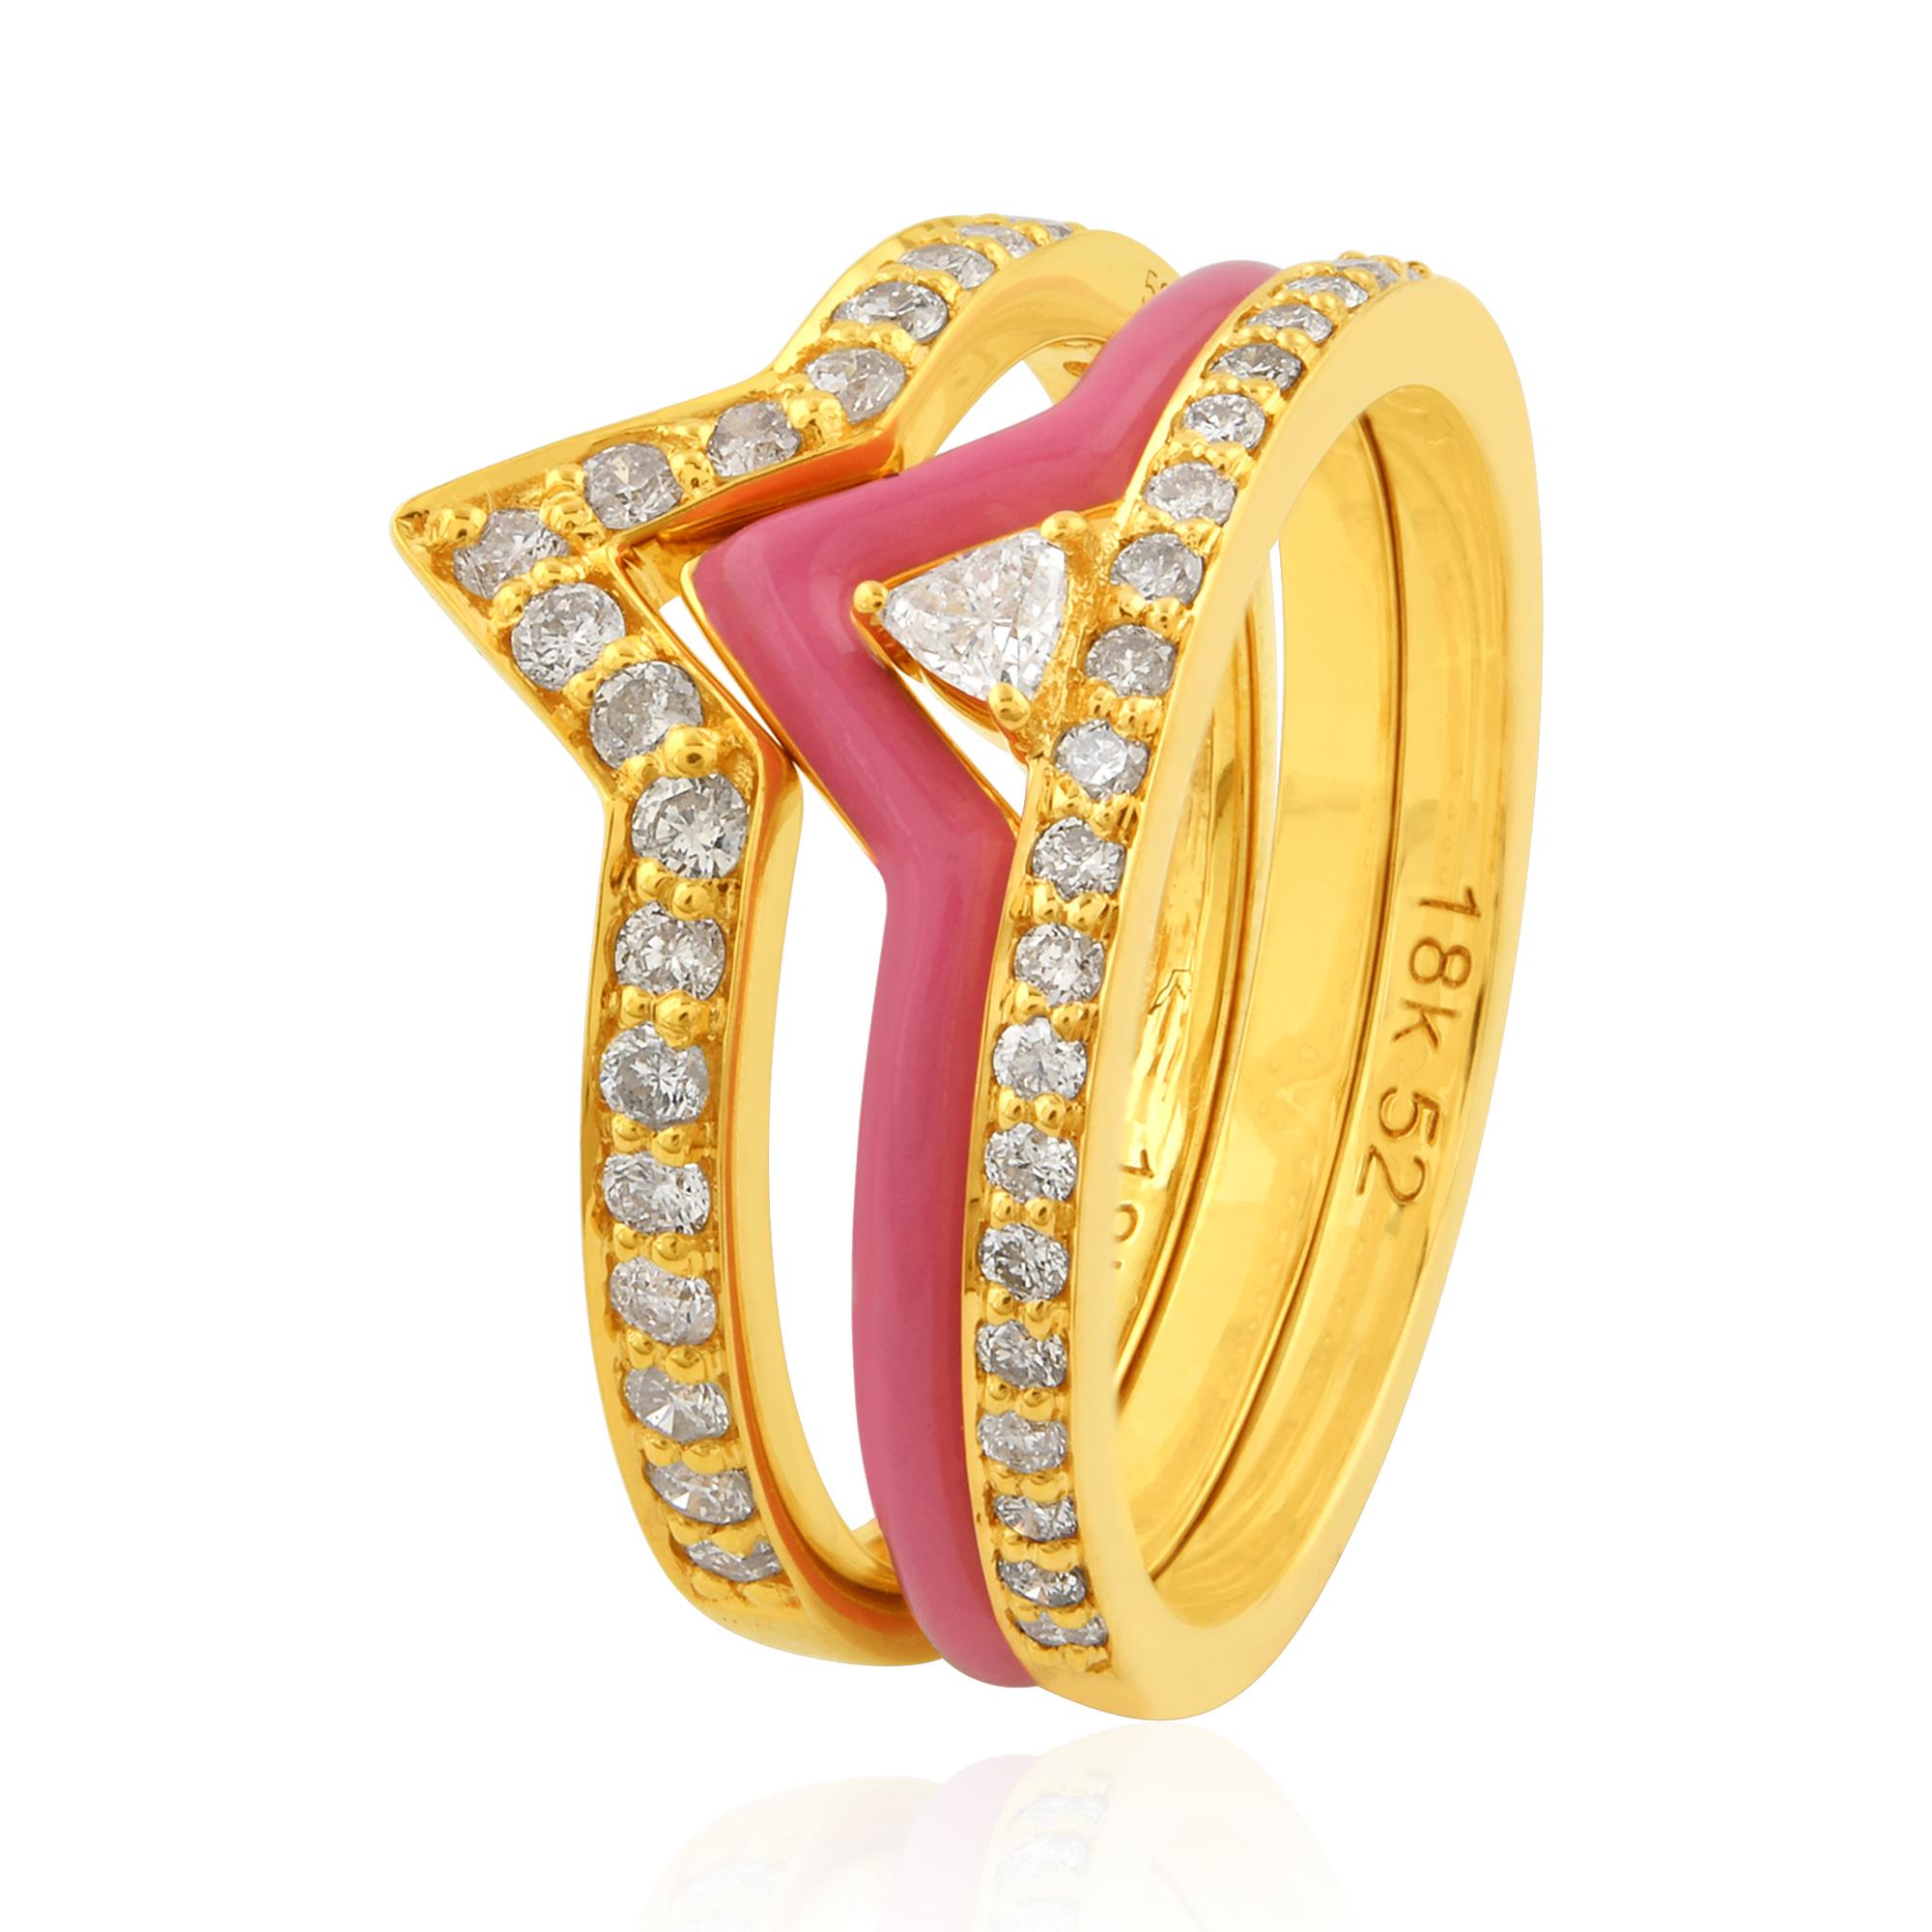 The Trillion Diamond Triple Chevron Ring Set in 18k gold is a luxurious and sophisticated piece of jewelry that exudes elegance and style. The combination of the sparkling trillion-cut diamonds, rich gold, and intricate enamel work results in a